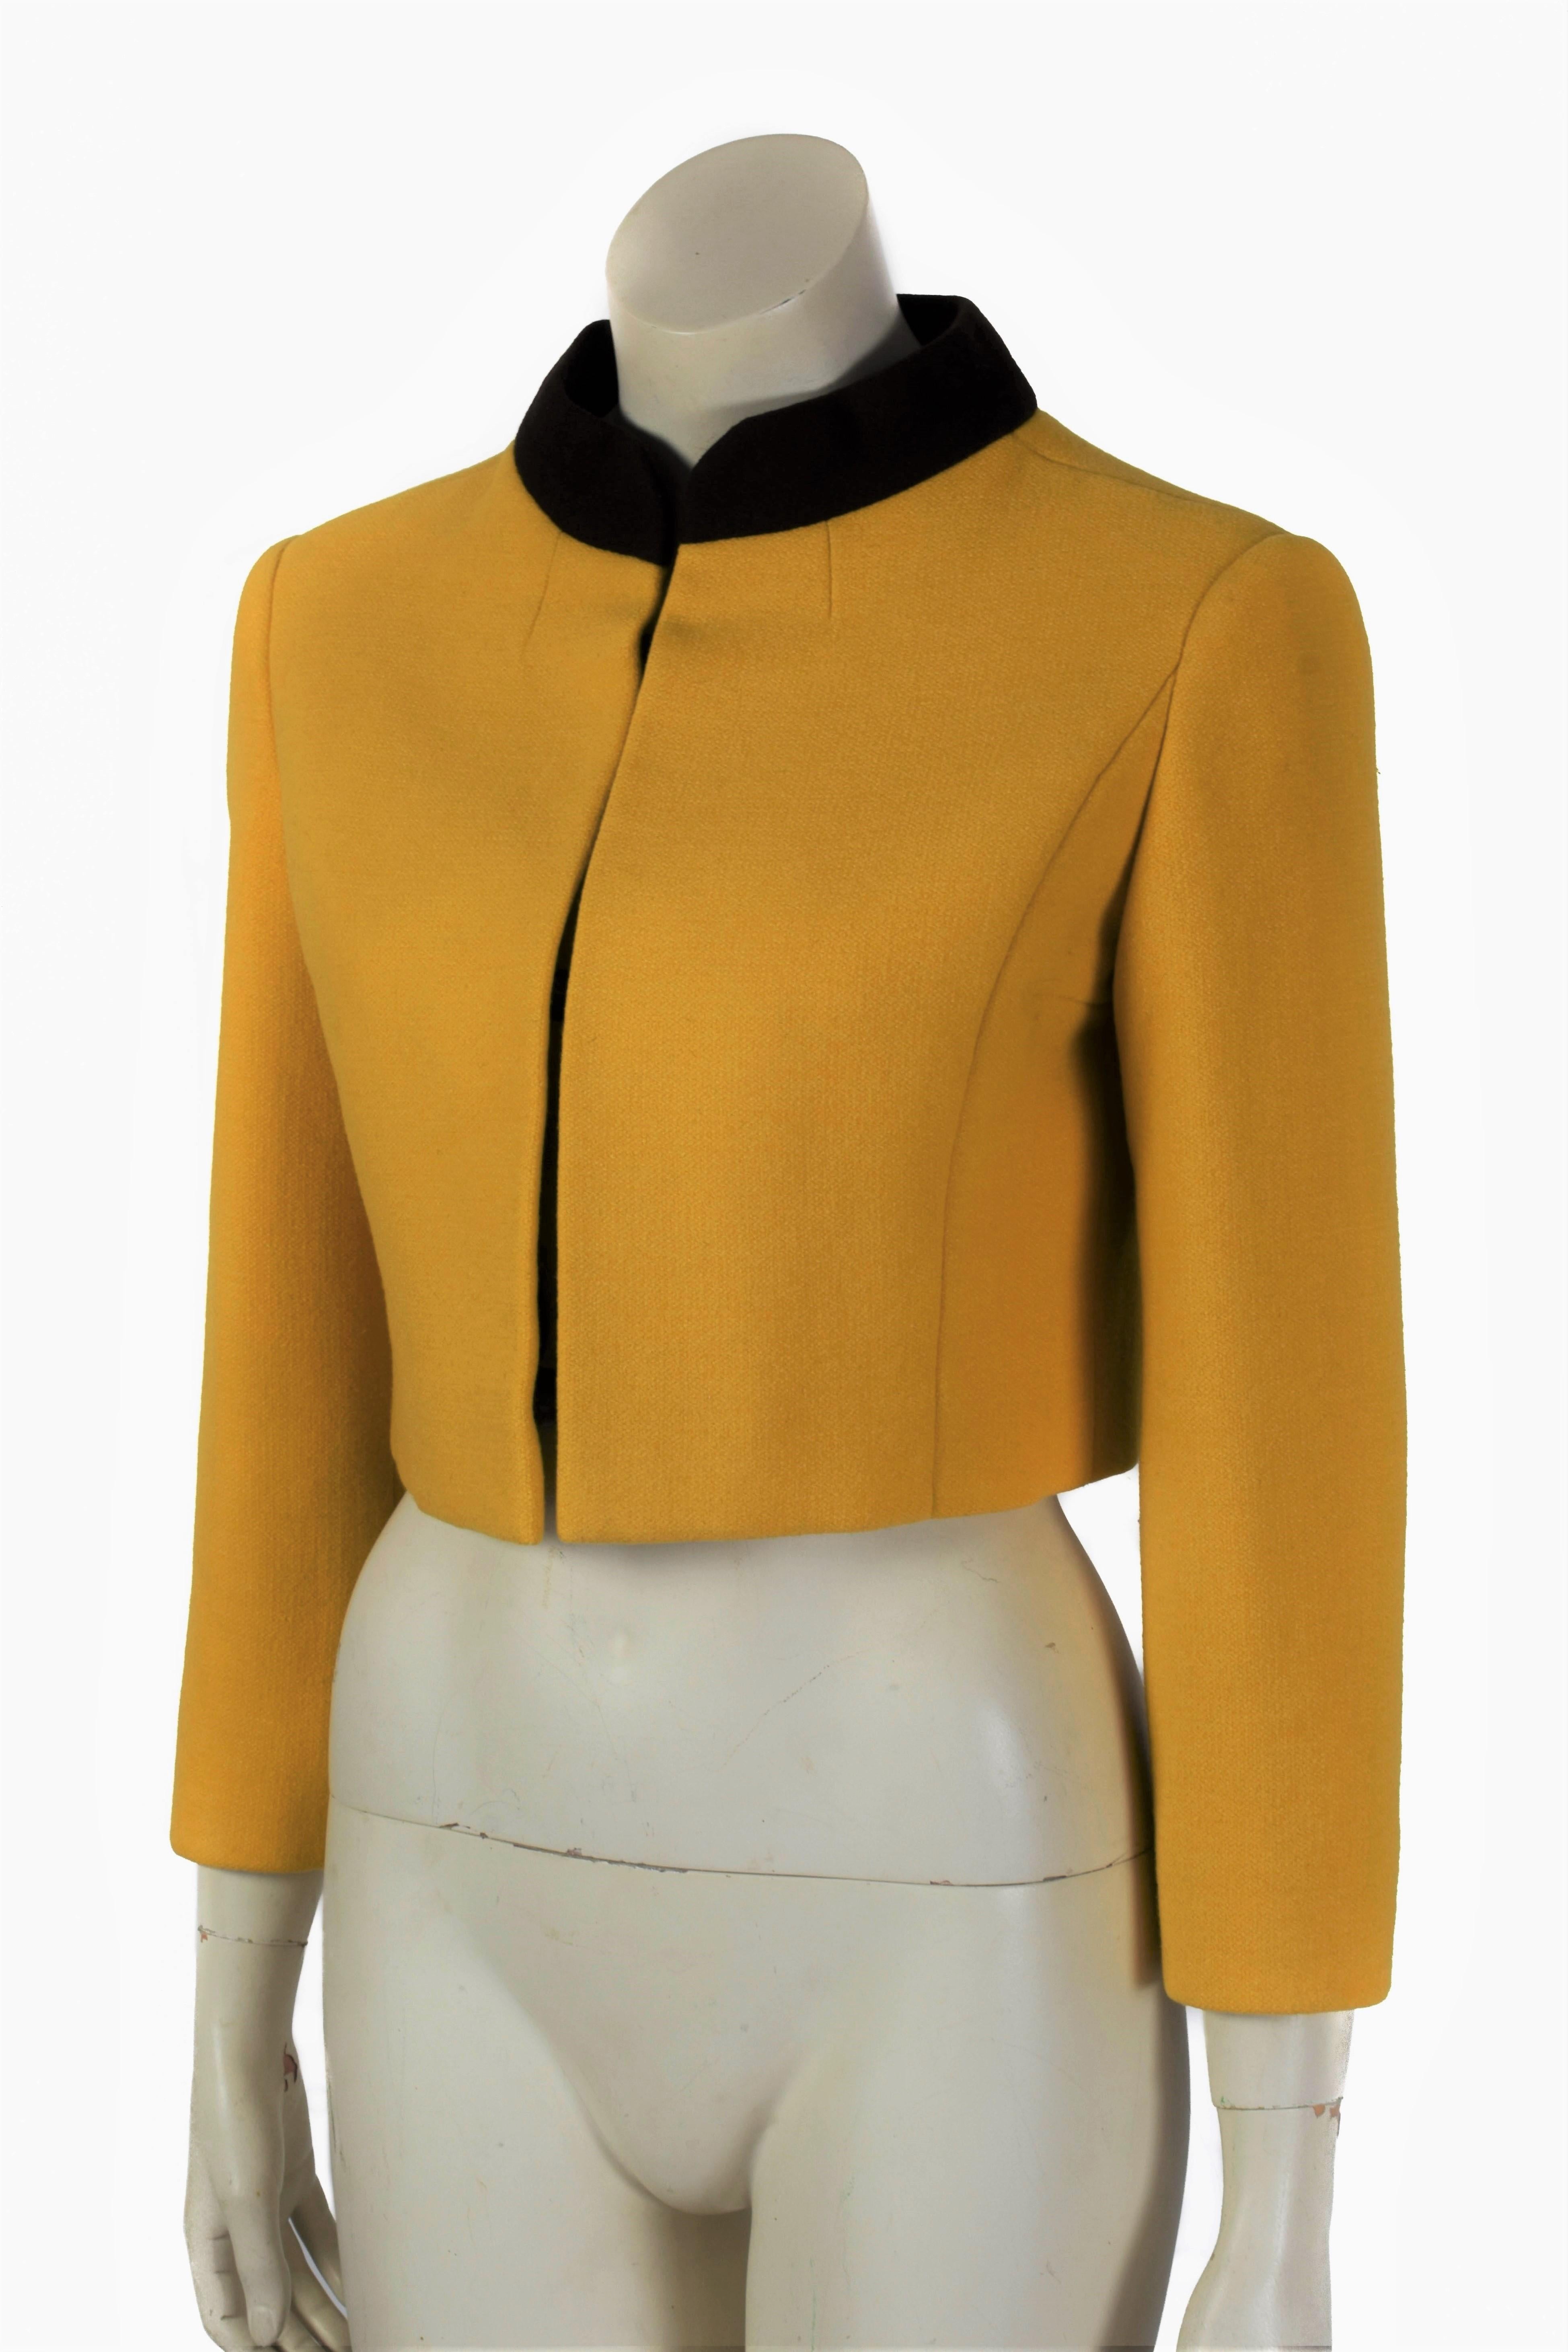 This 1960's jacket by Jacques Heim is a lovely Haute Couture piece in a deep shade of yellow. It is a cropped model which accentuates the waist and has a hidden toggle closure.

Size: Appoximately S / US 6 / UK 8 / FR 38
Haute Couture Numbered